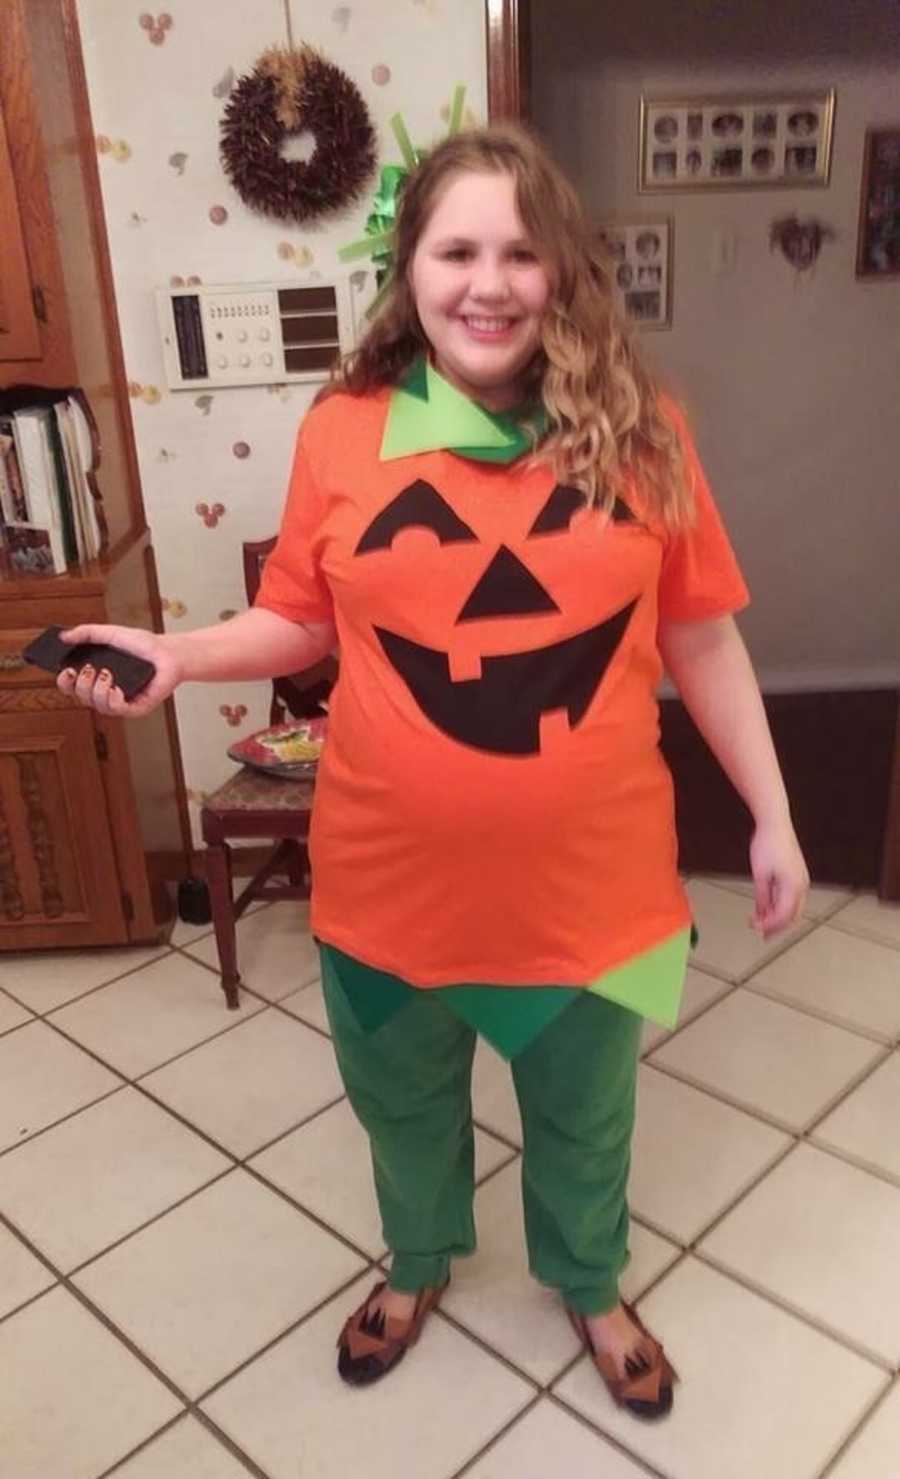 Woman stands smiling in kitchen wearing jack-o-lantern costume